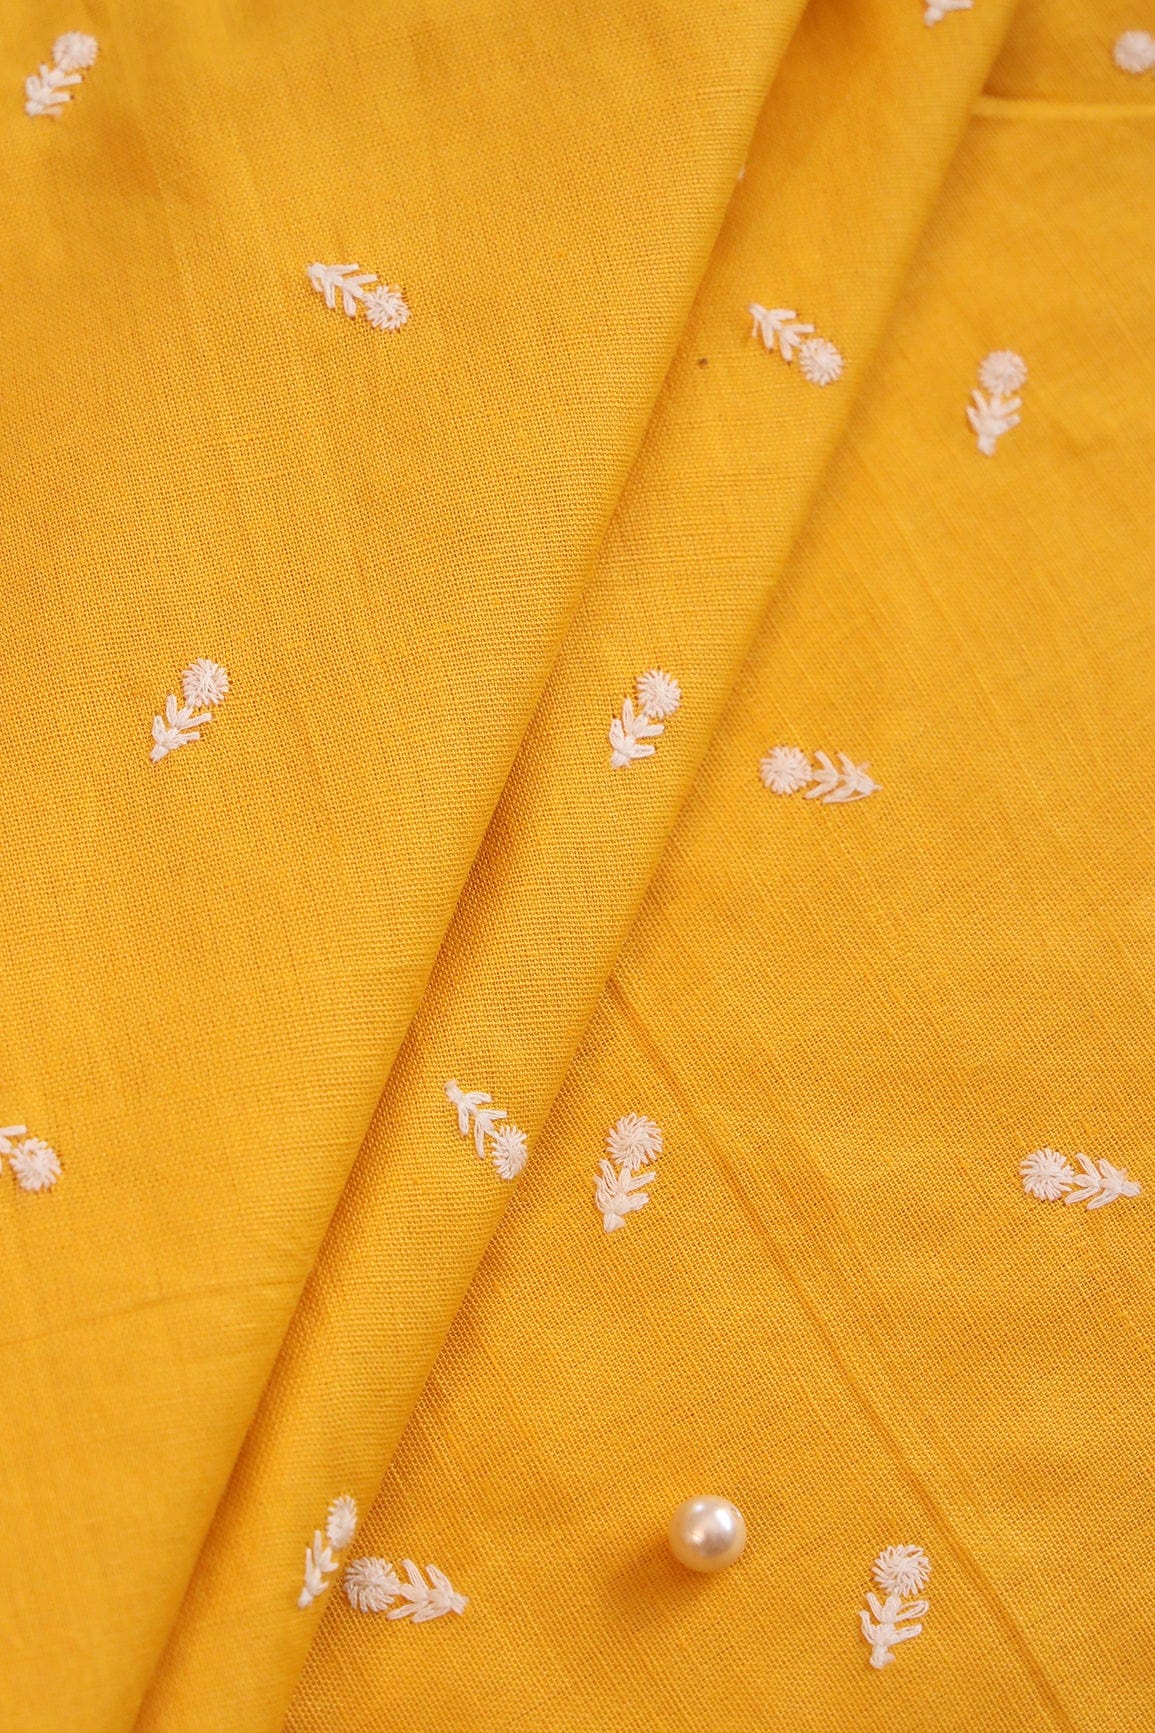 doeraa Embroidery Fabrics White Thread Small Floral Motif Embroidery Work On Yellow Cotton Linen Fabric